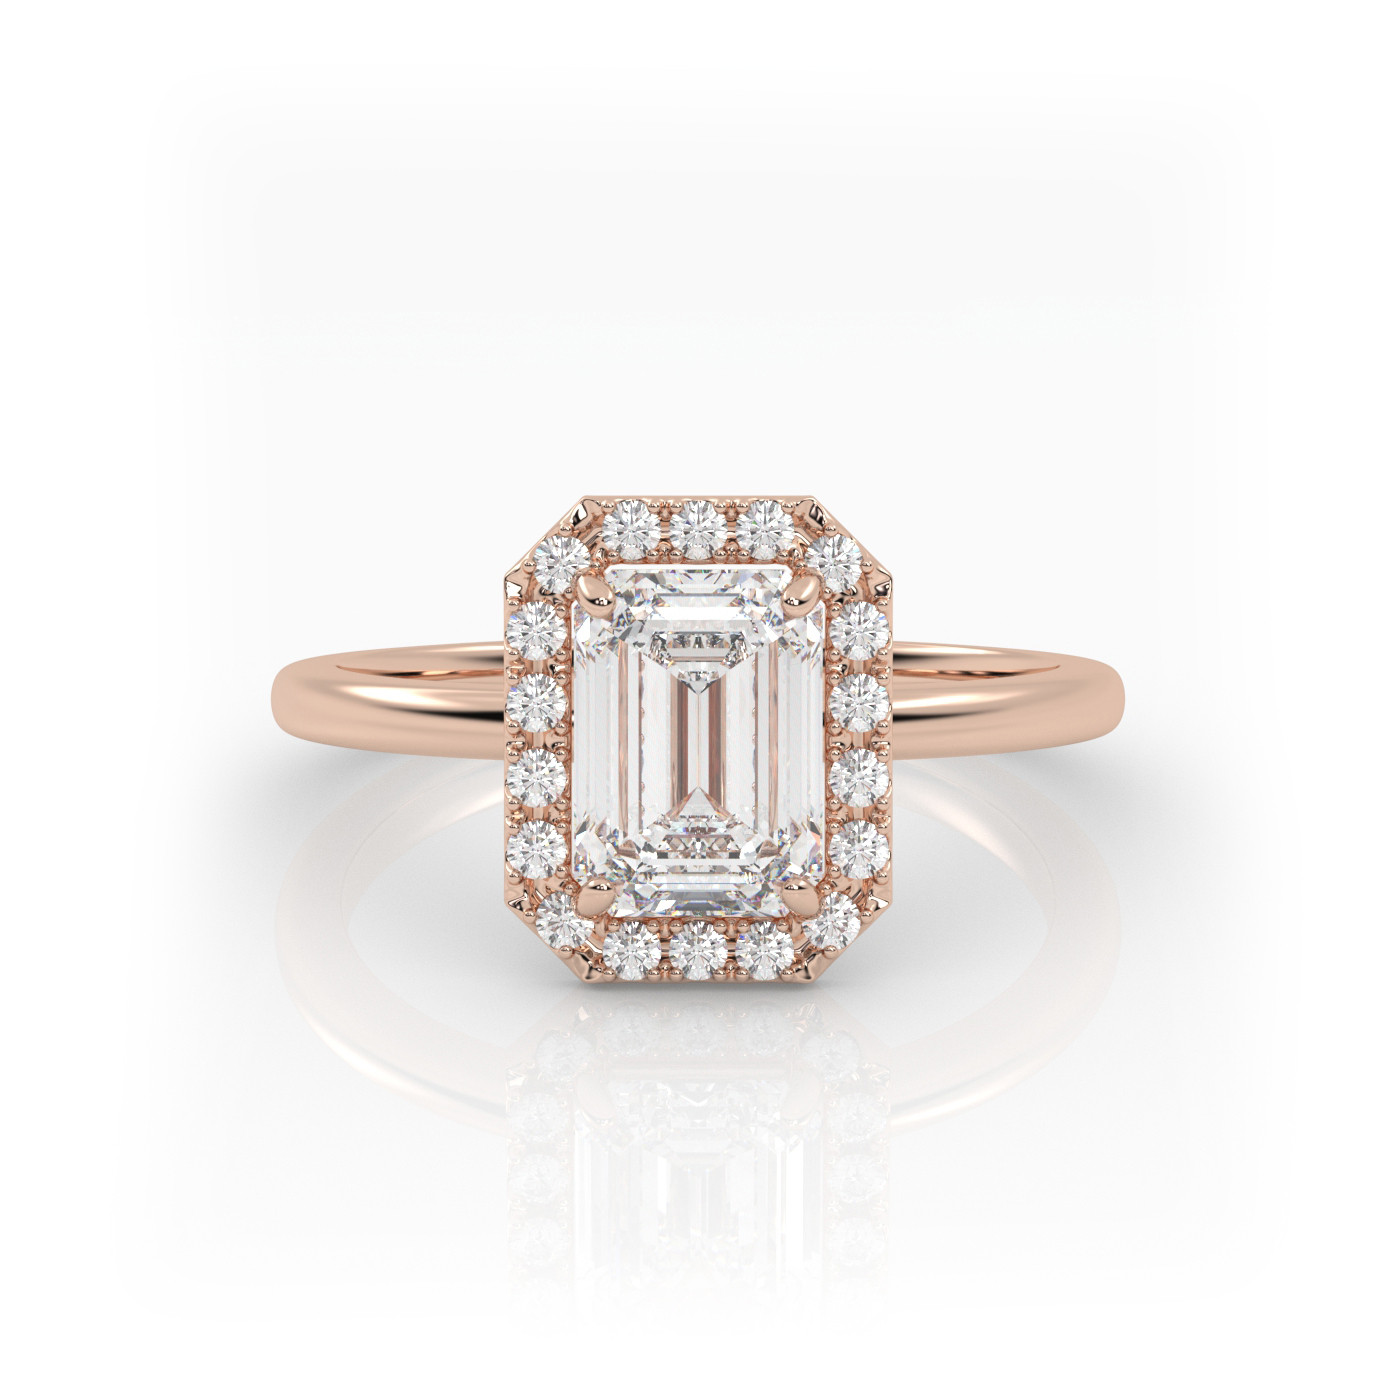 18K ROSE GOLD Emerald Diamond Engagement Ring with Halo Style